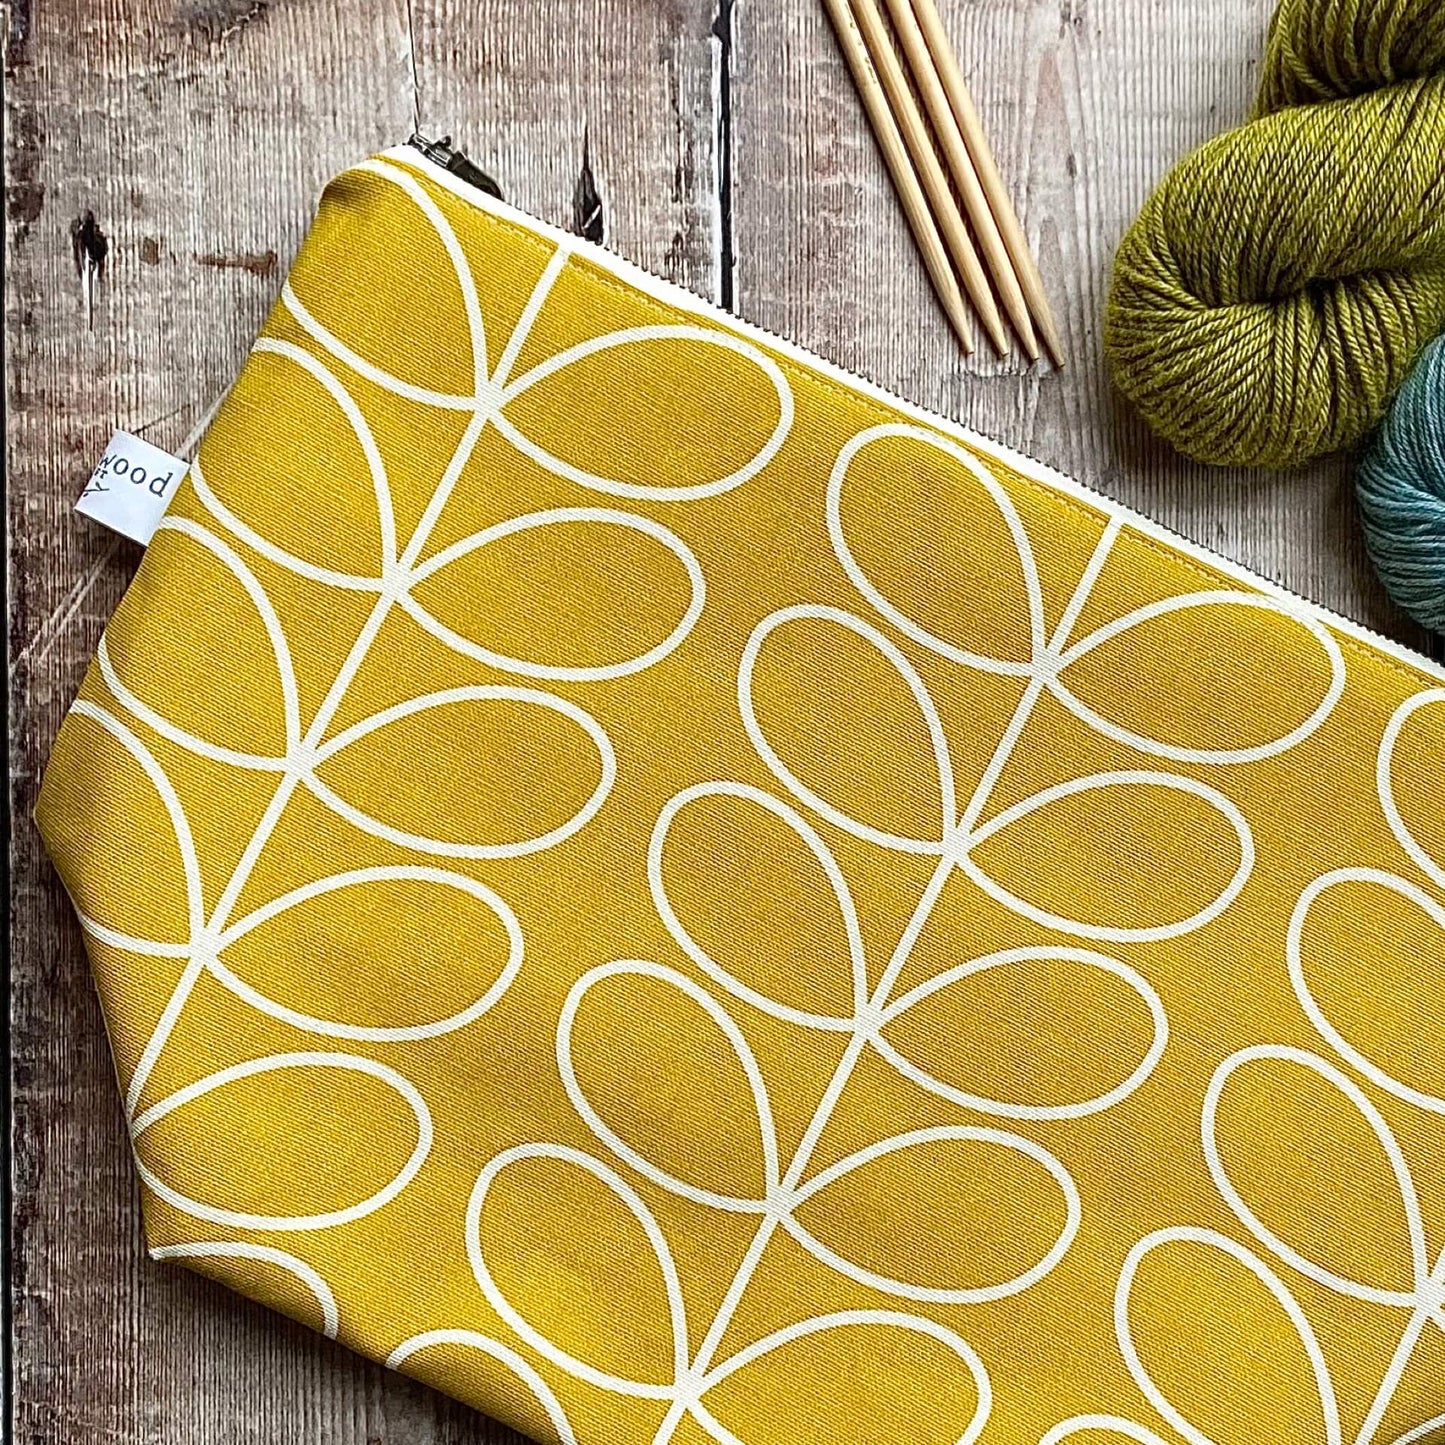 A sunshine yellow knitting project bag sits on a wooden table next to some skeins of yarn. 